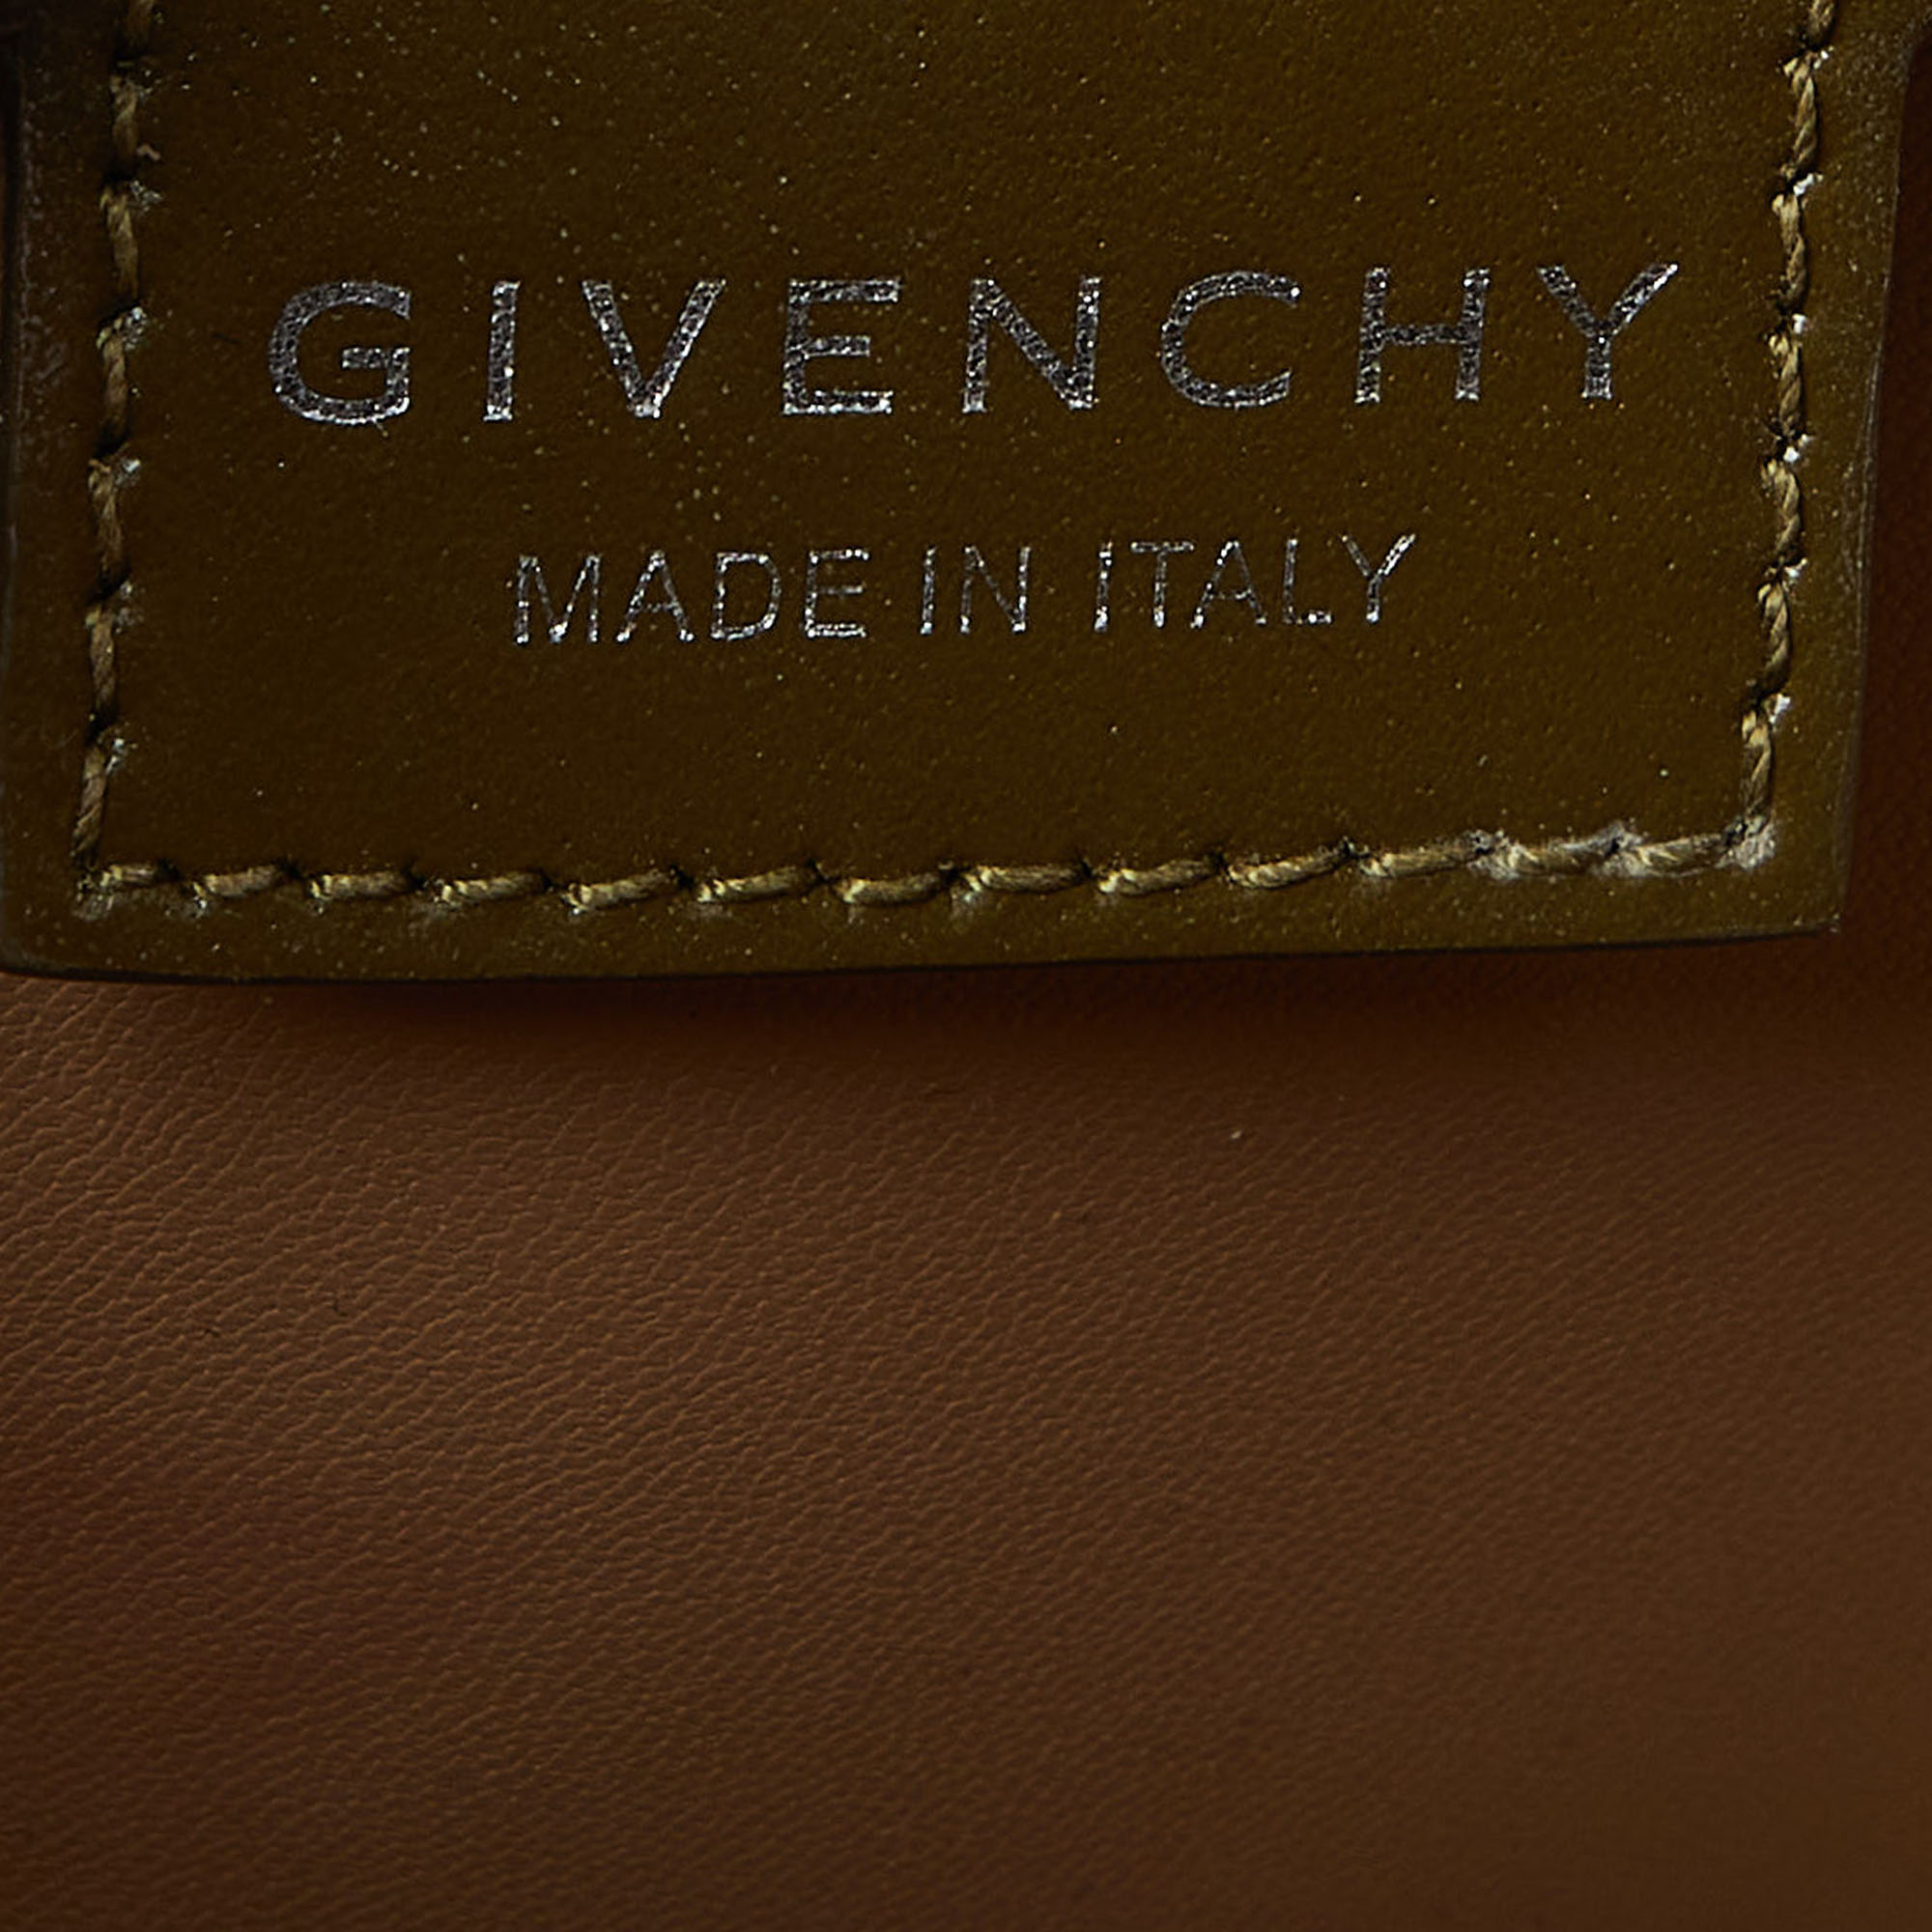 Givenchy Olive Green Glossy Leather Chain Cut Out Bag